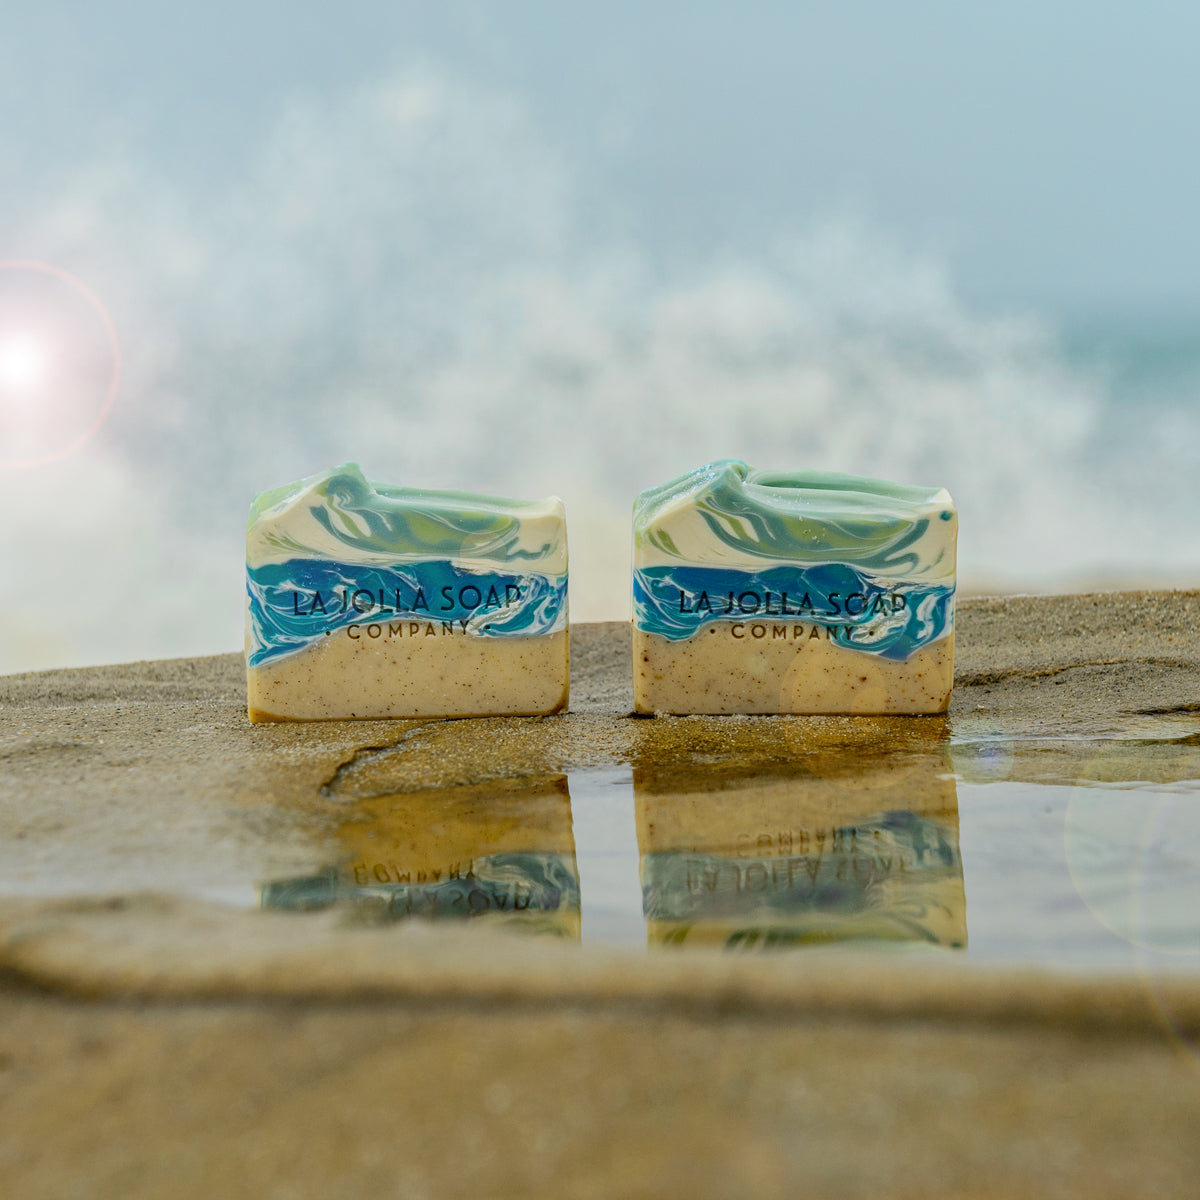 Inspired by the tropical breeze here in paradise! This wave of organic coconut milk, oils, and butters creates a creamy, hydration-packed lather. Tropical-inspired fragrance and a hint of fine-ground vanilla bean add some vacation beachy vibes to your shower ritual. Ah, paradise!